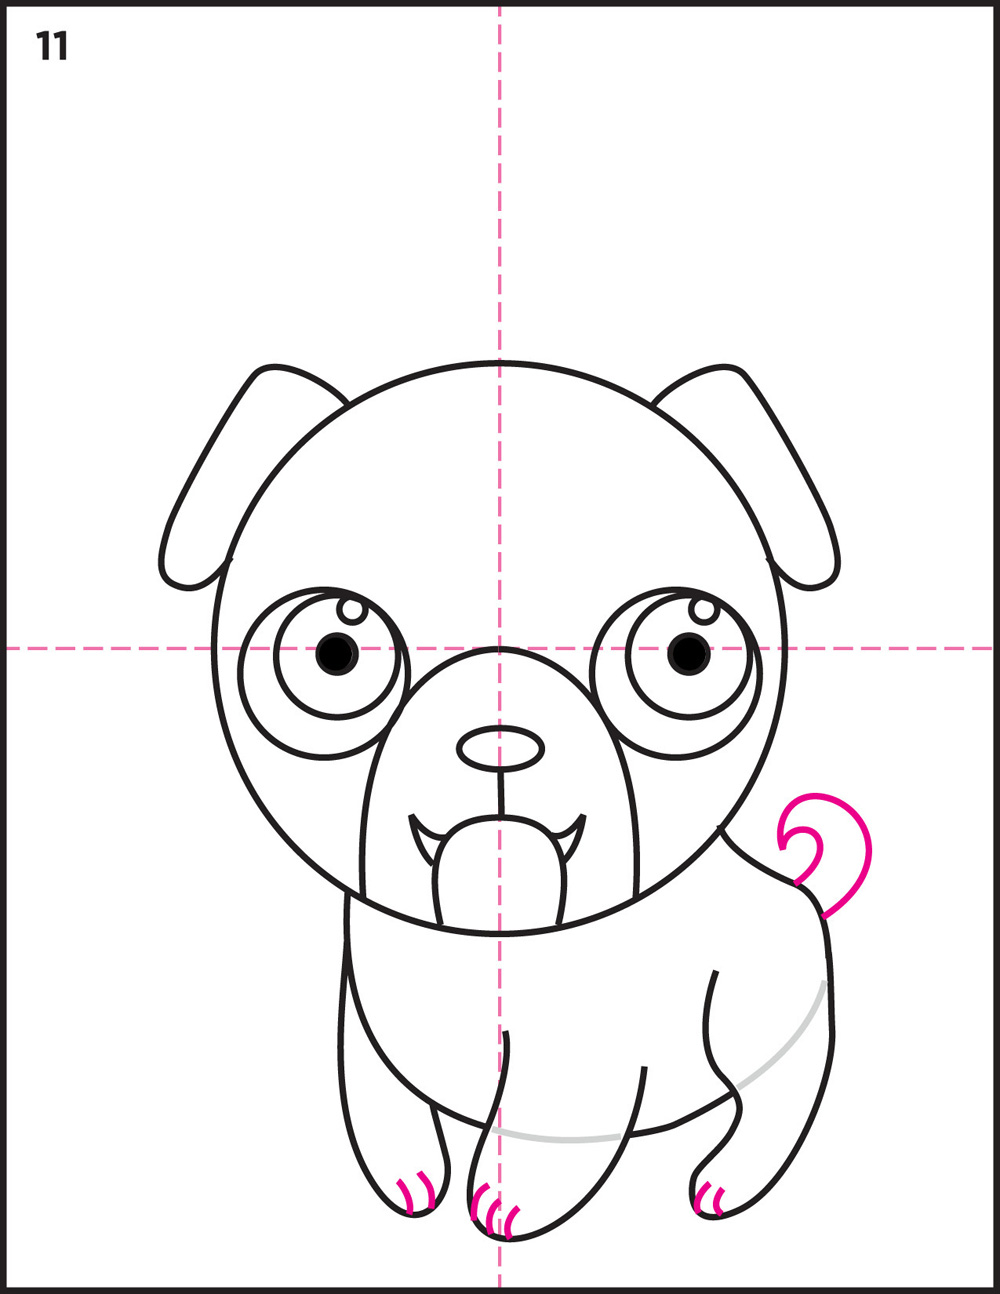 How to Draw a Pug · Art Projects for Kids